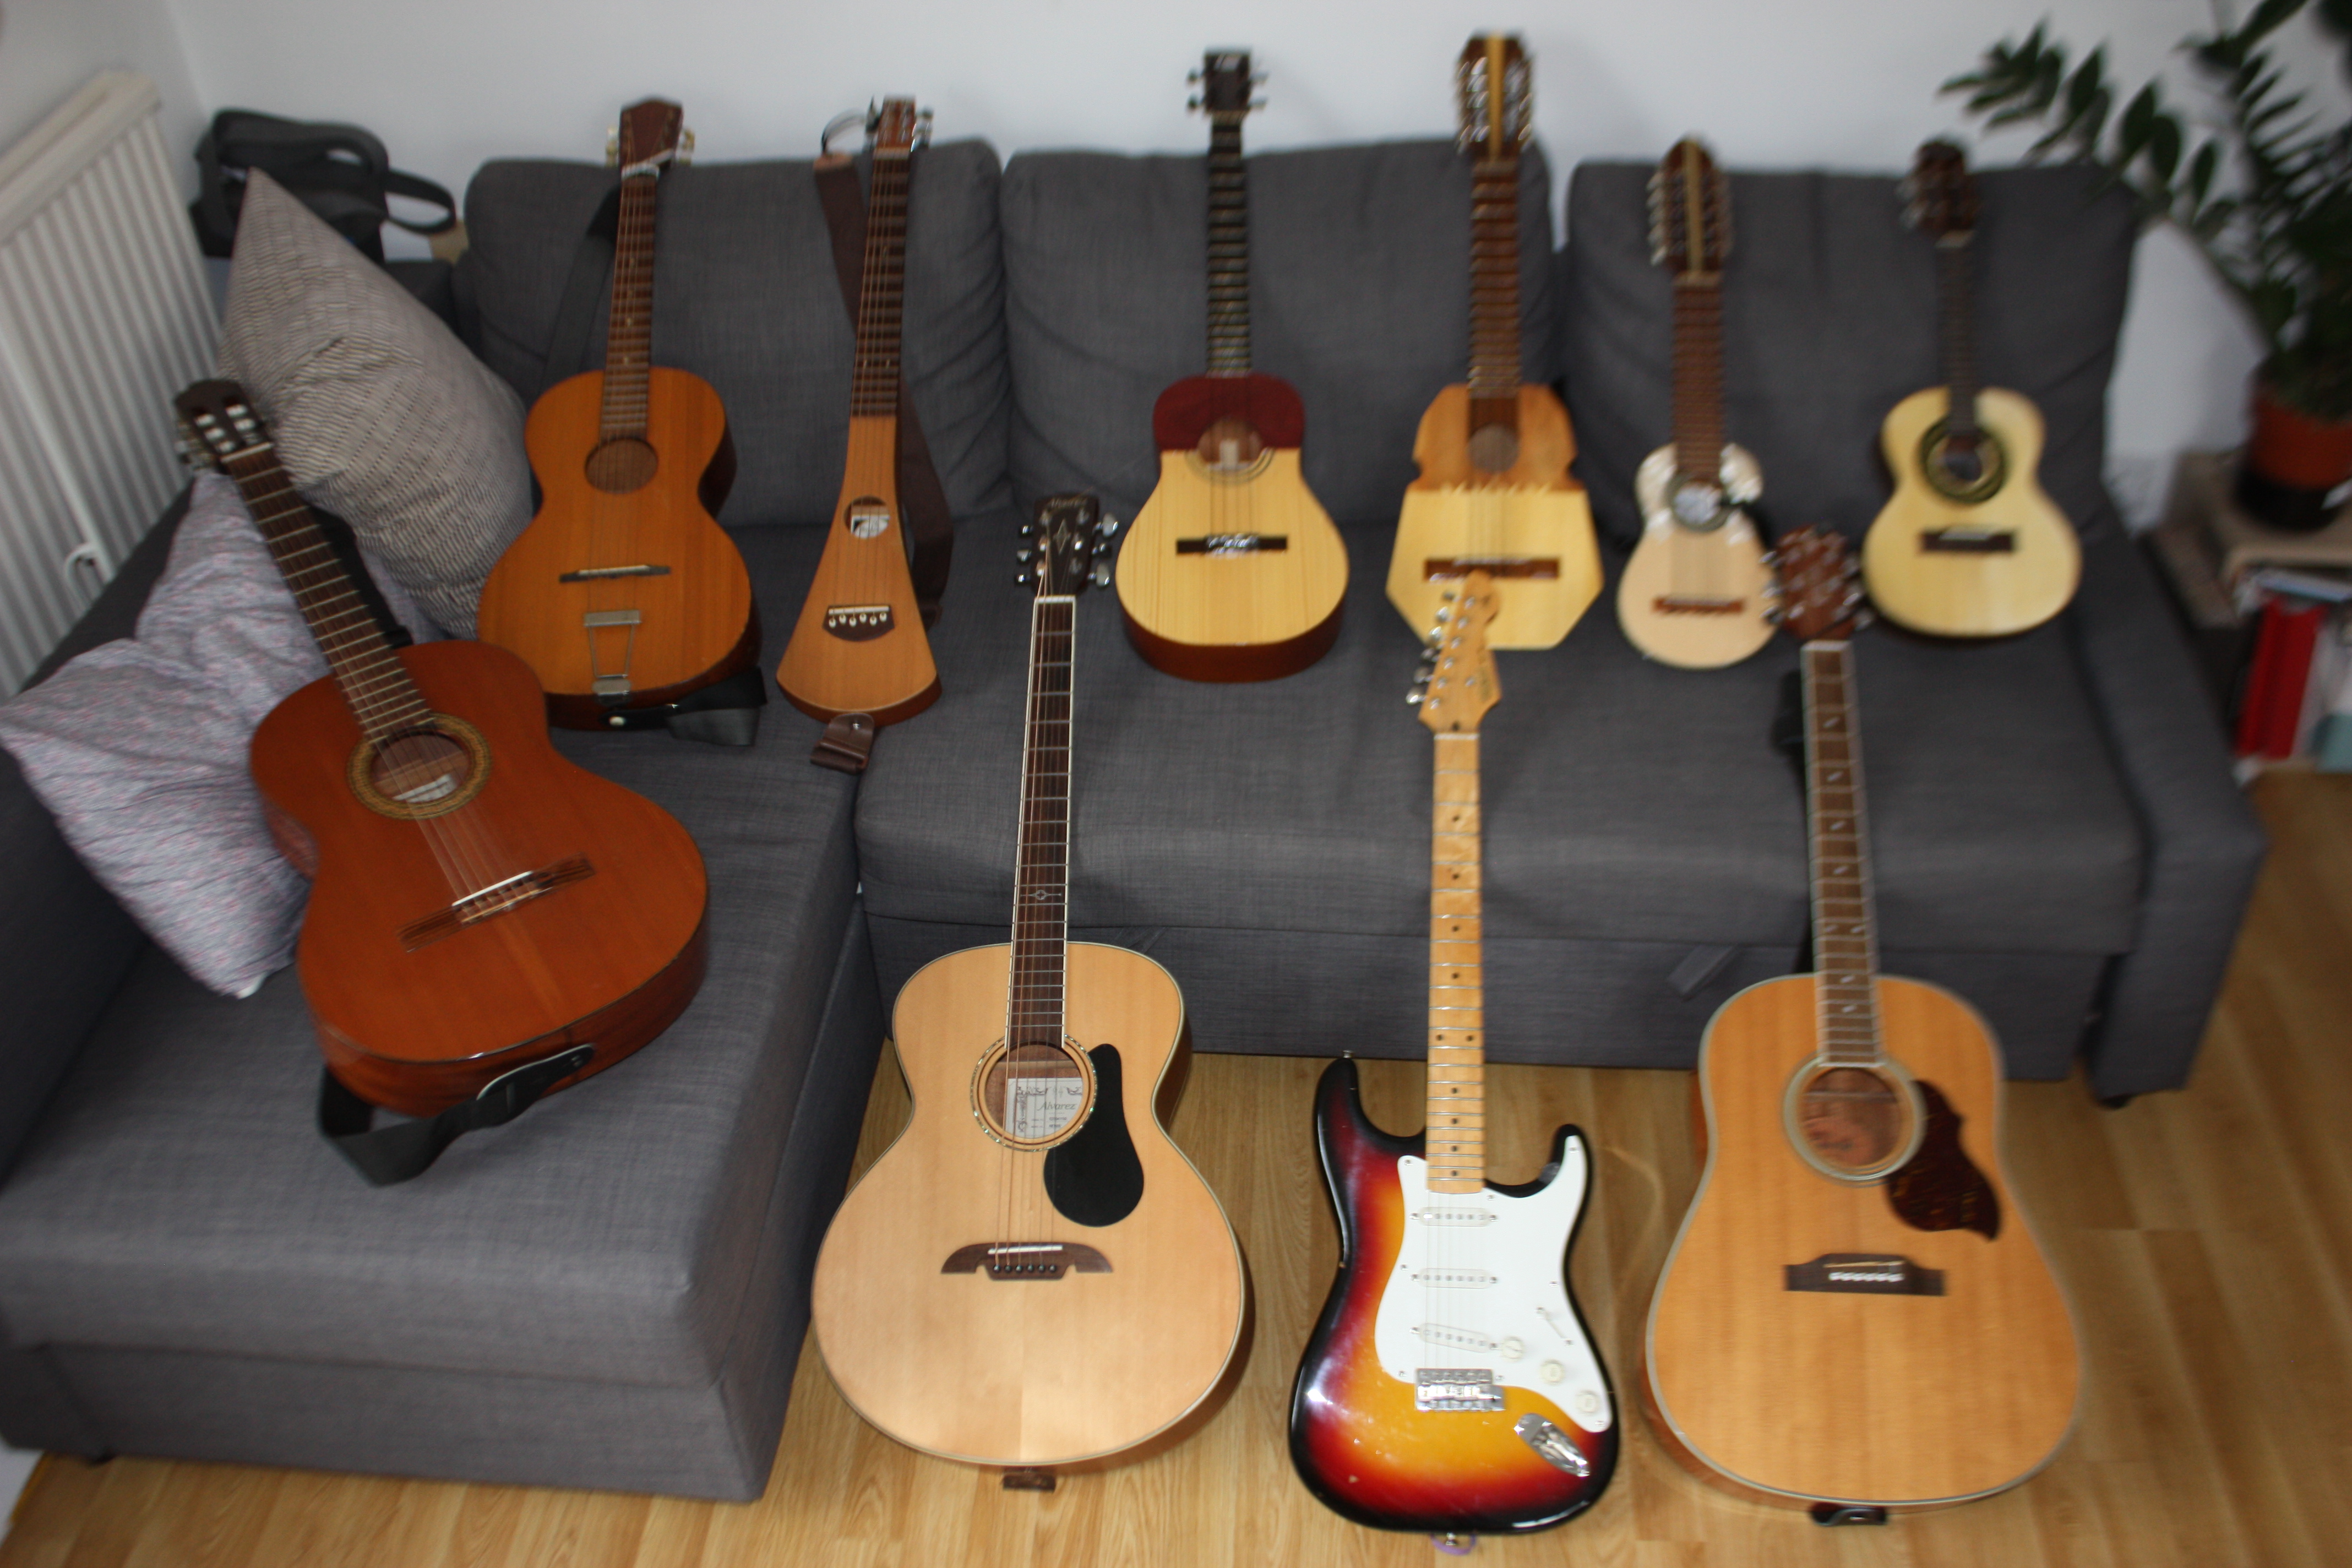 Example of blurry photo. Guitars on the top row, particularly on the right, are extremely blurry